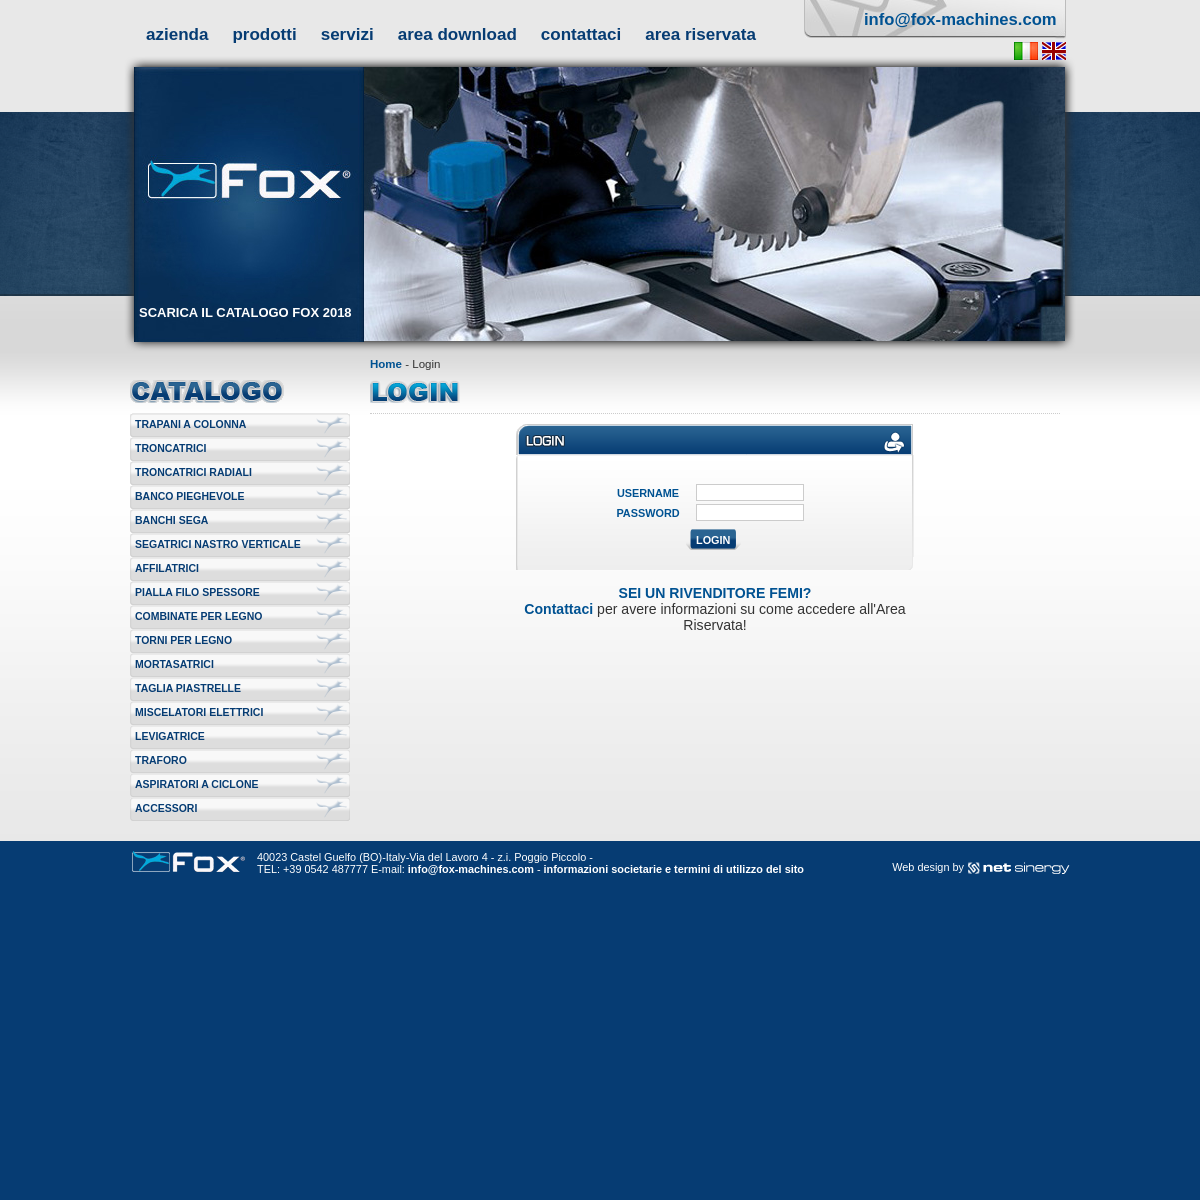 A complete backup of fox-machines.com